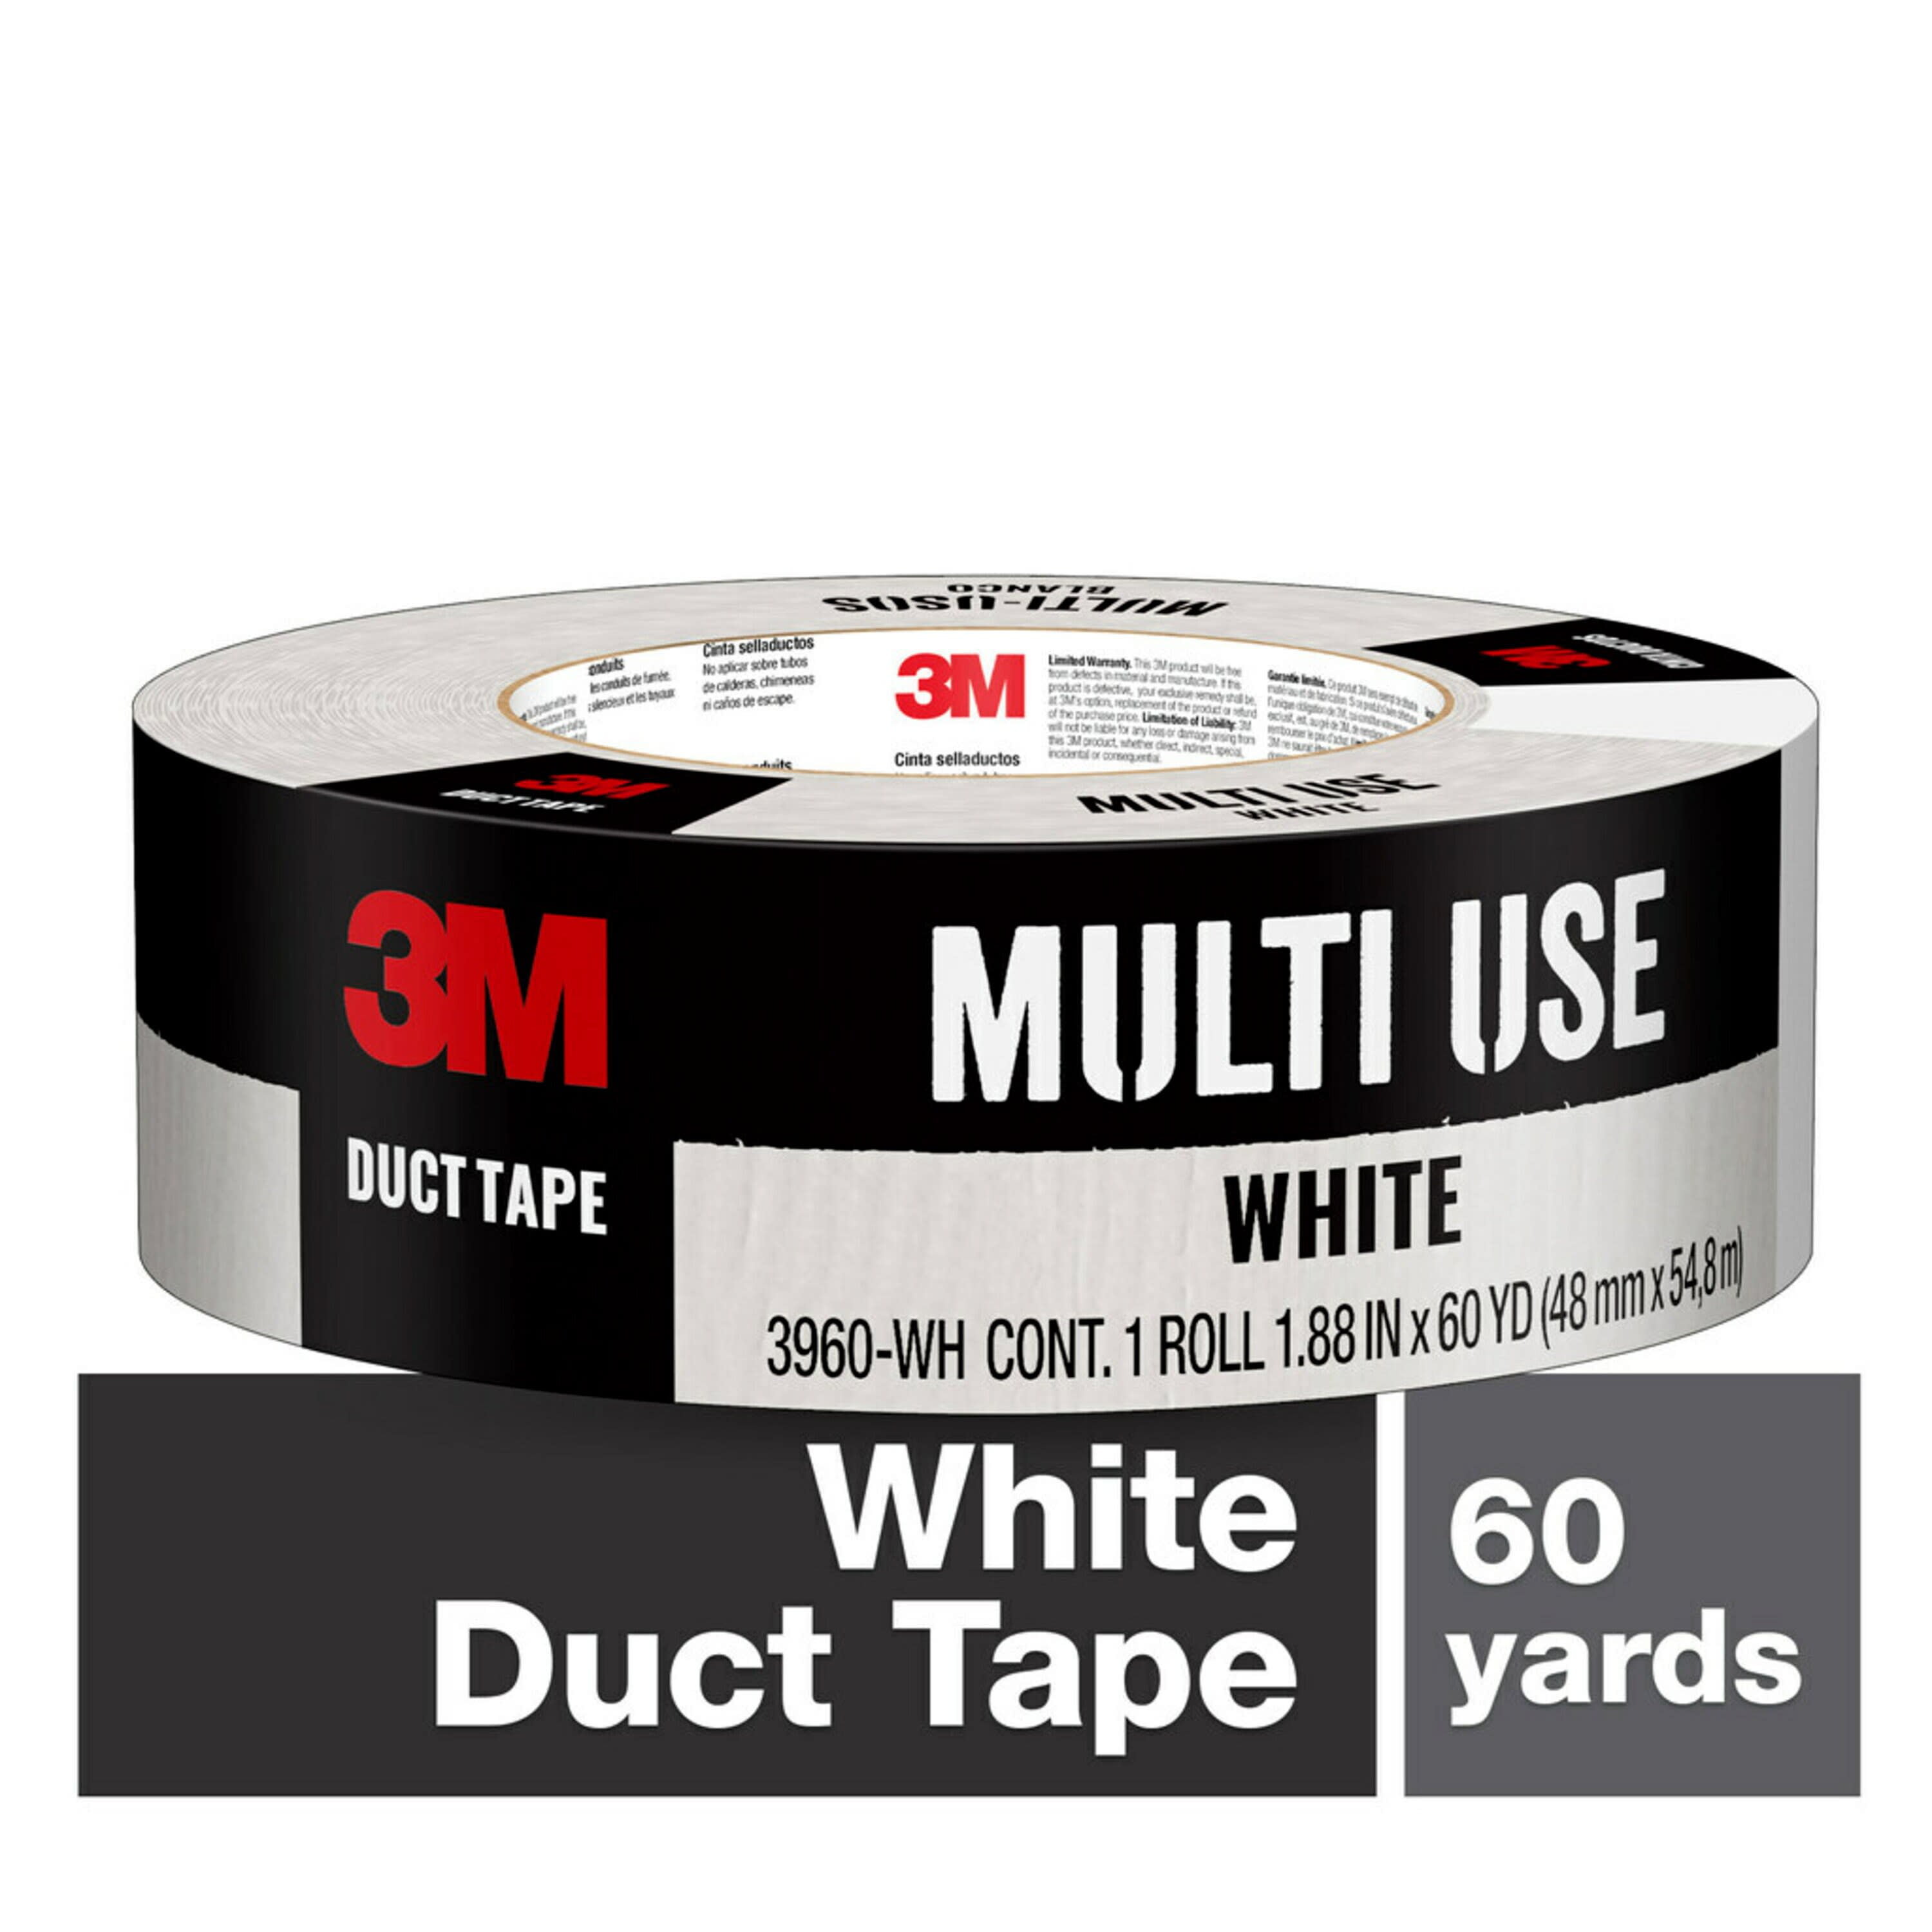 3 Duct Tape - Silver - Gray- Wholesale Price - High Quality Tape